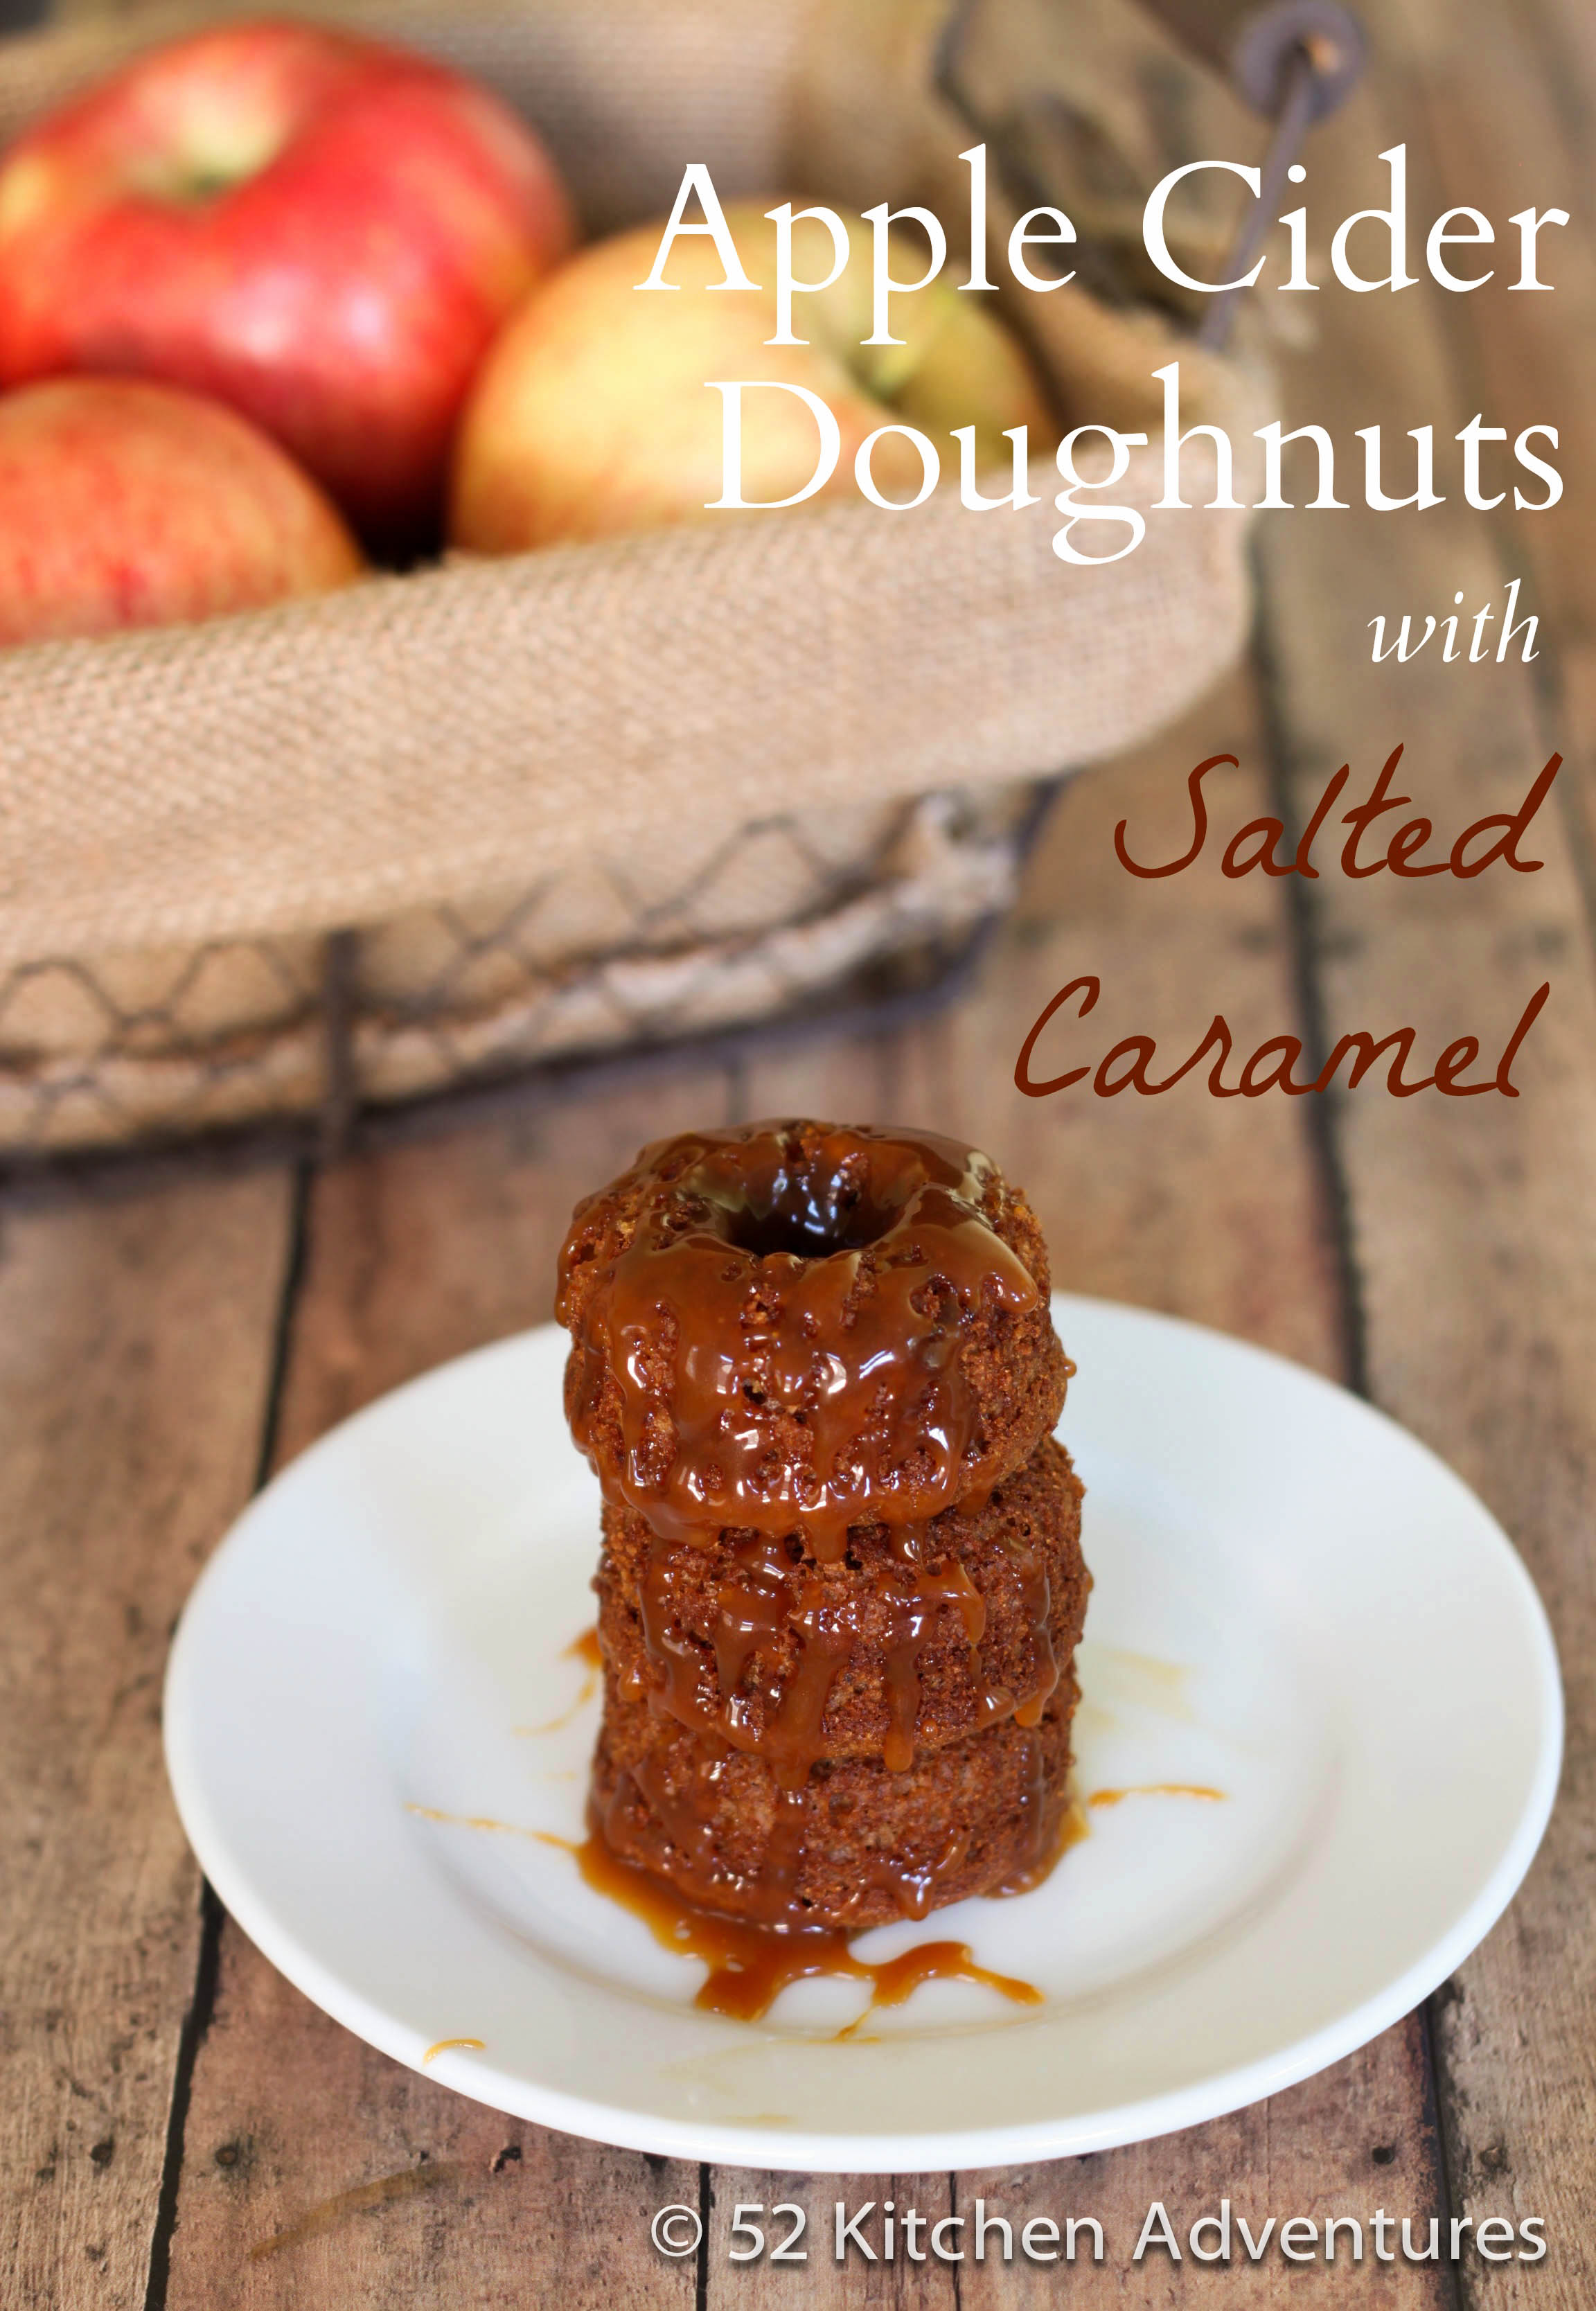 Apple Cider Doughnuts with Salted Caramel